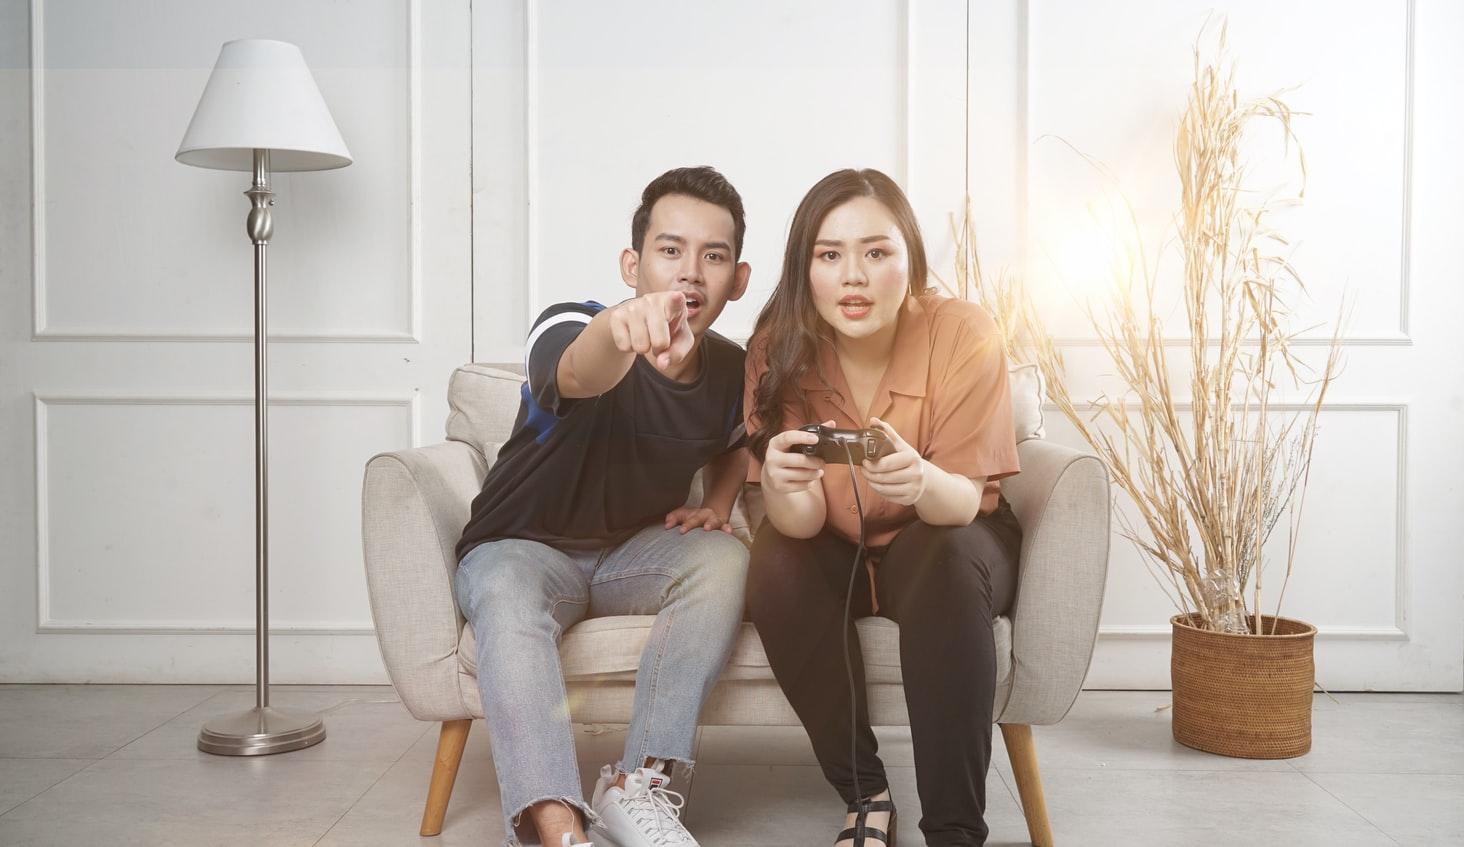 A person and person sitting on a couch playing video games

Description automatically generated with medium confidence